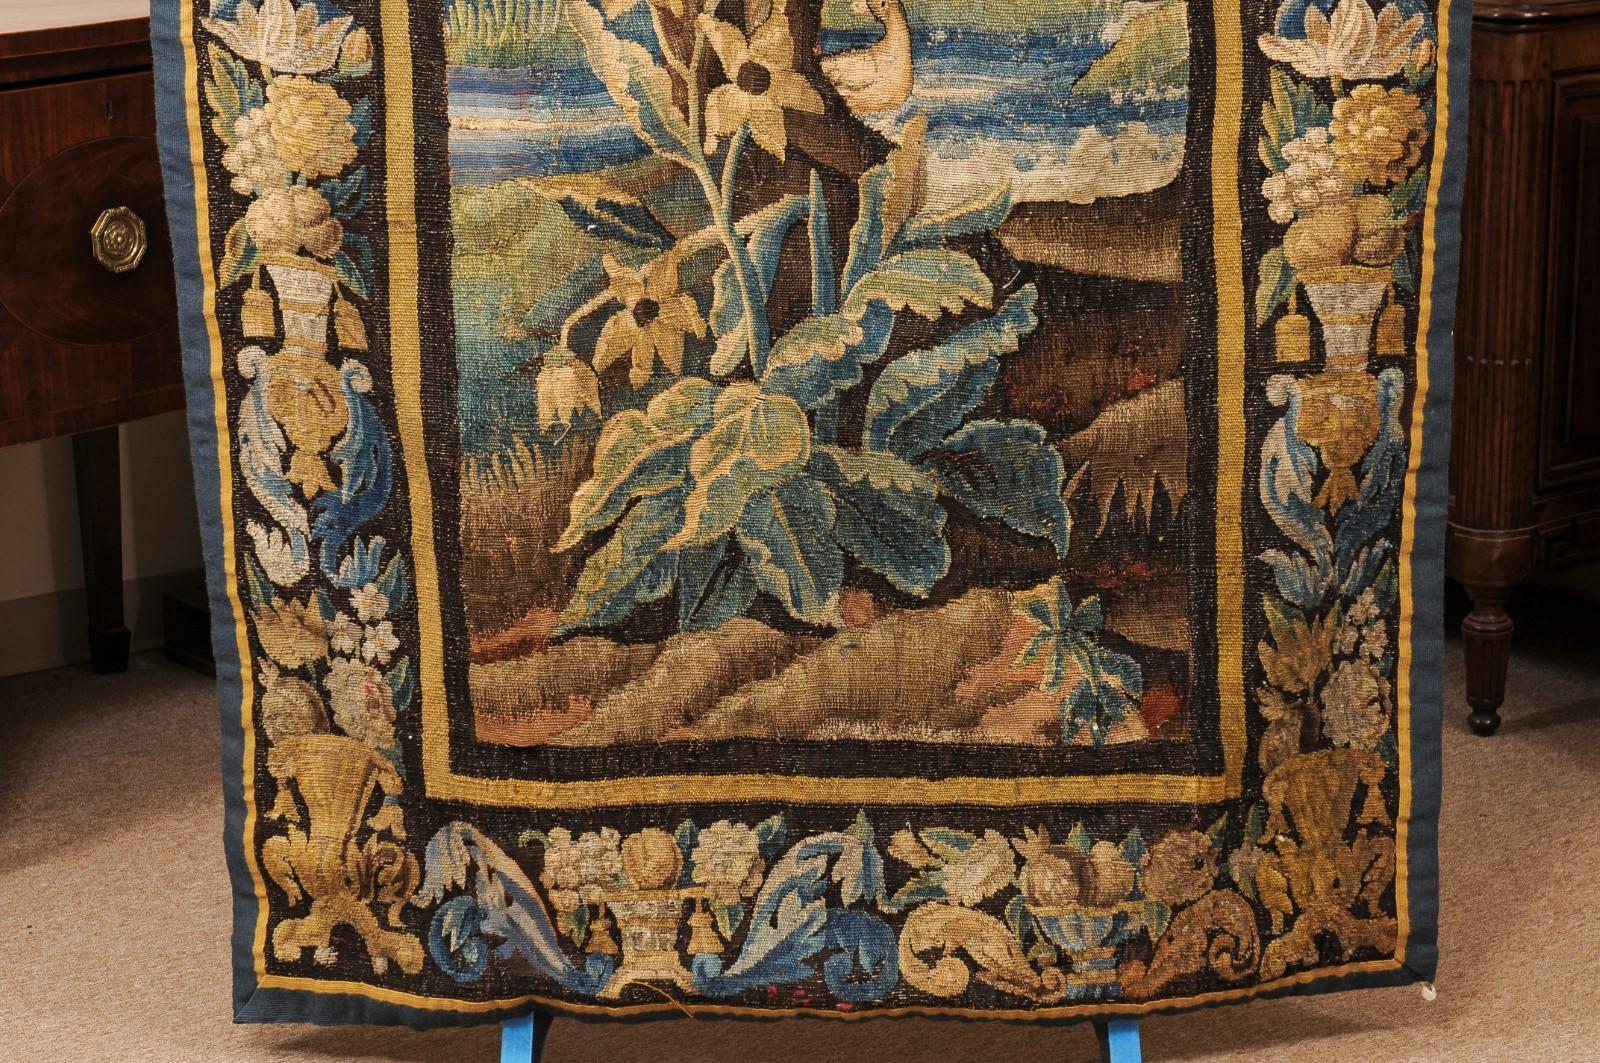 Vertical 18th Century French Aubusson Tapestry with Foliage, Bird & Original Bor In Fair Condition For Sale In Atlanta, GA